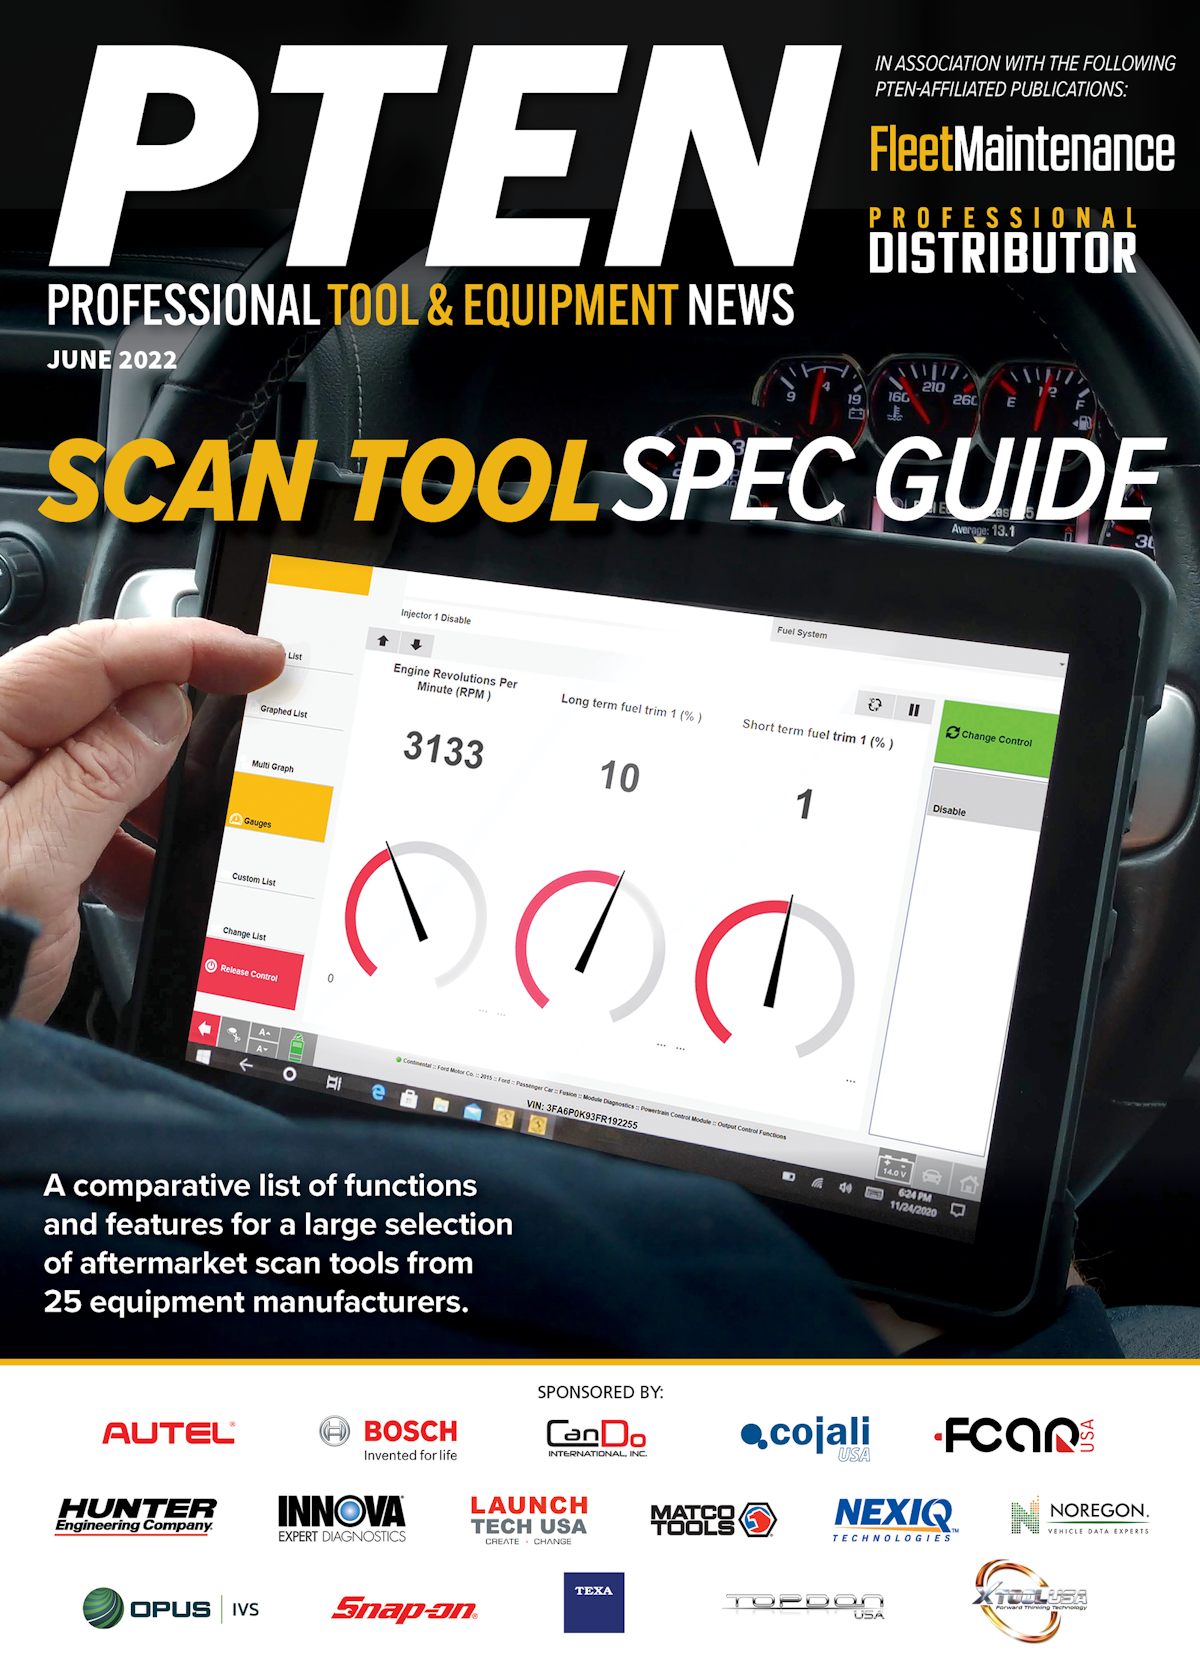 Scan Tool Spec Guide - June 2022 cover image